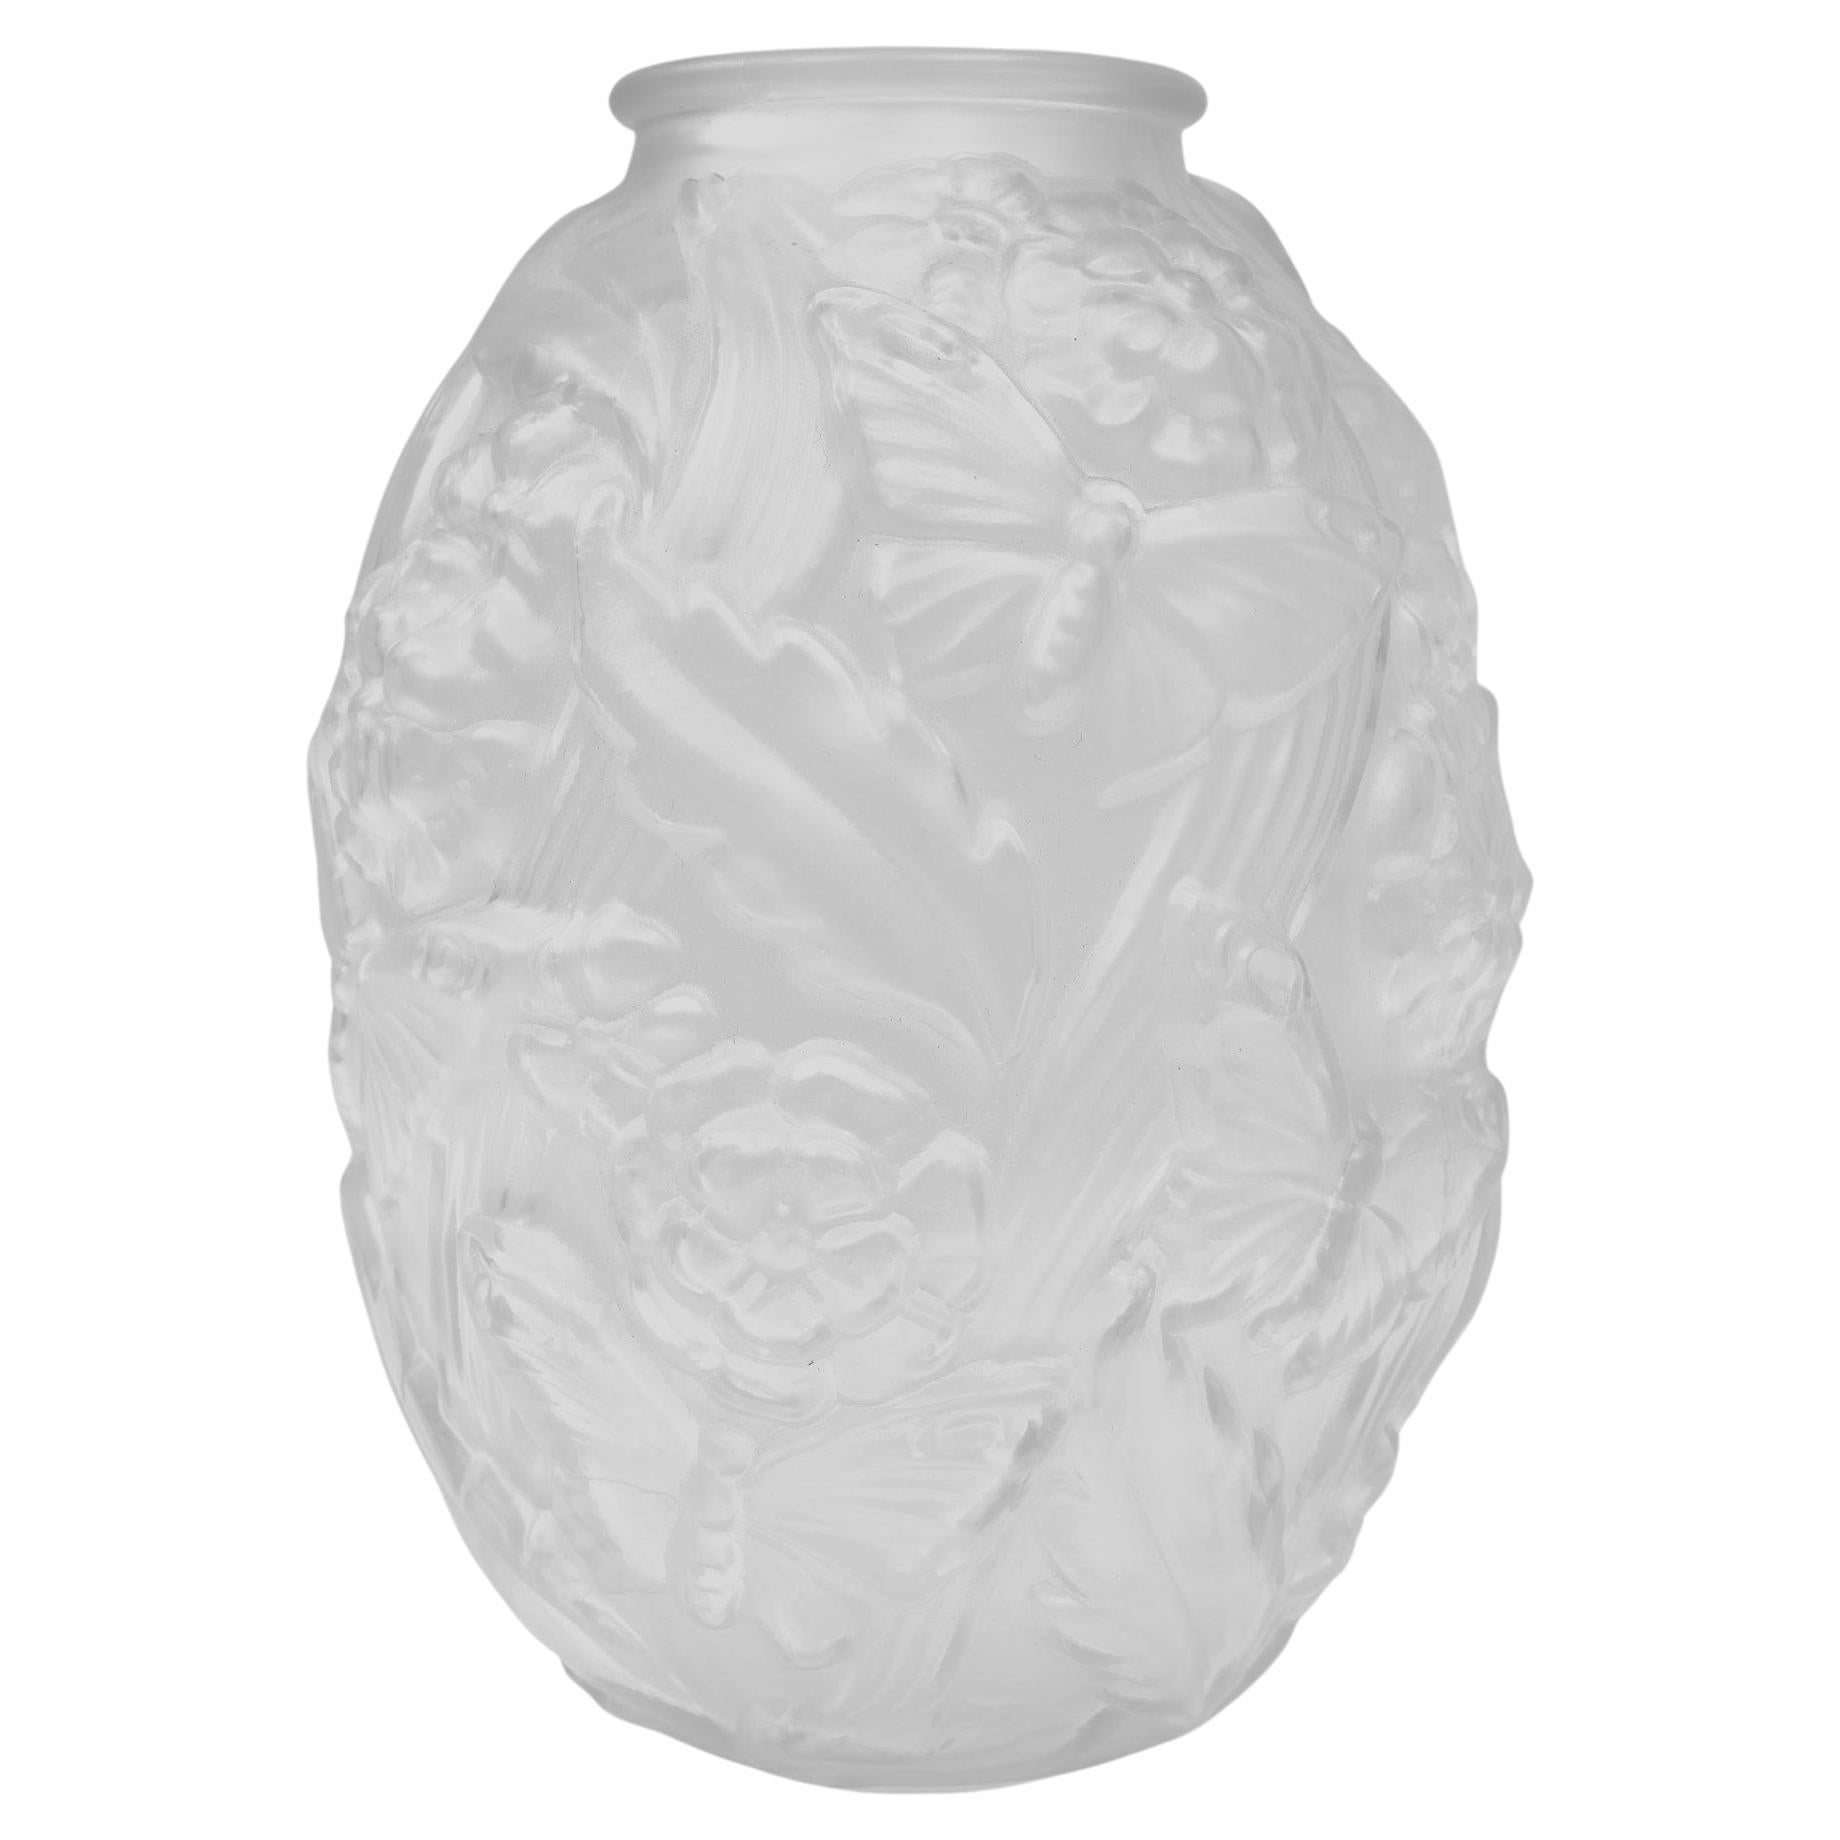 A beautiful large pressed glass satined Art Deco vase.
Very nice decor of flowers and butterflies in high relief, all the way around the vase, very finely detailed.
In very good condition.
 